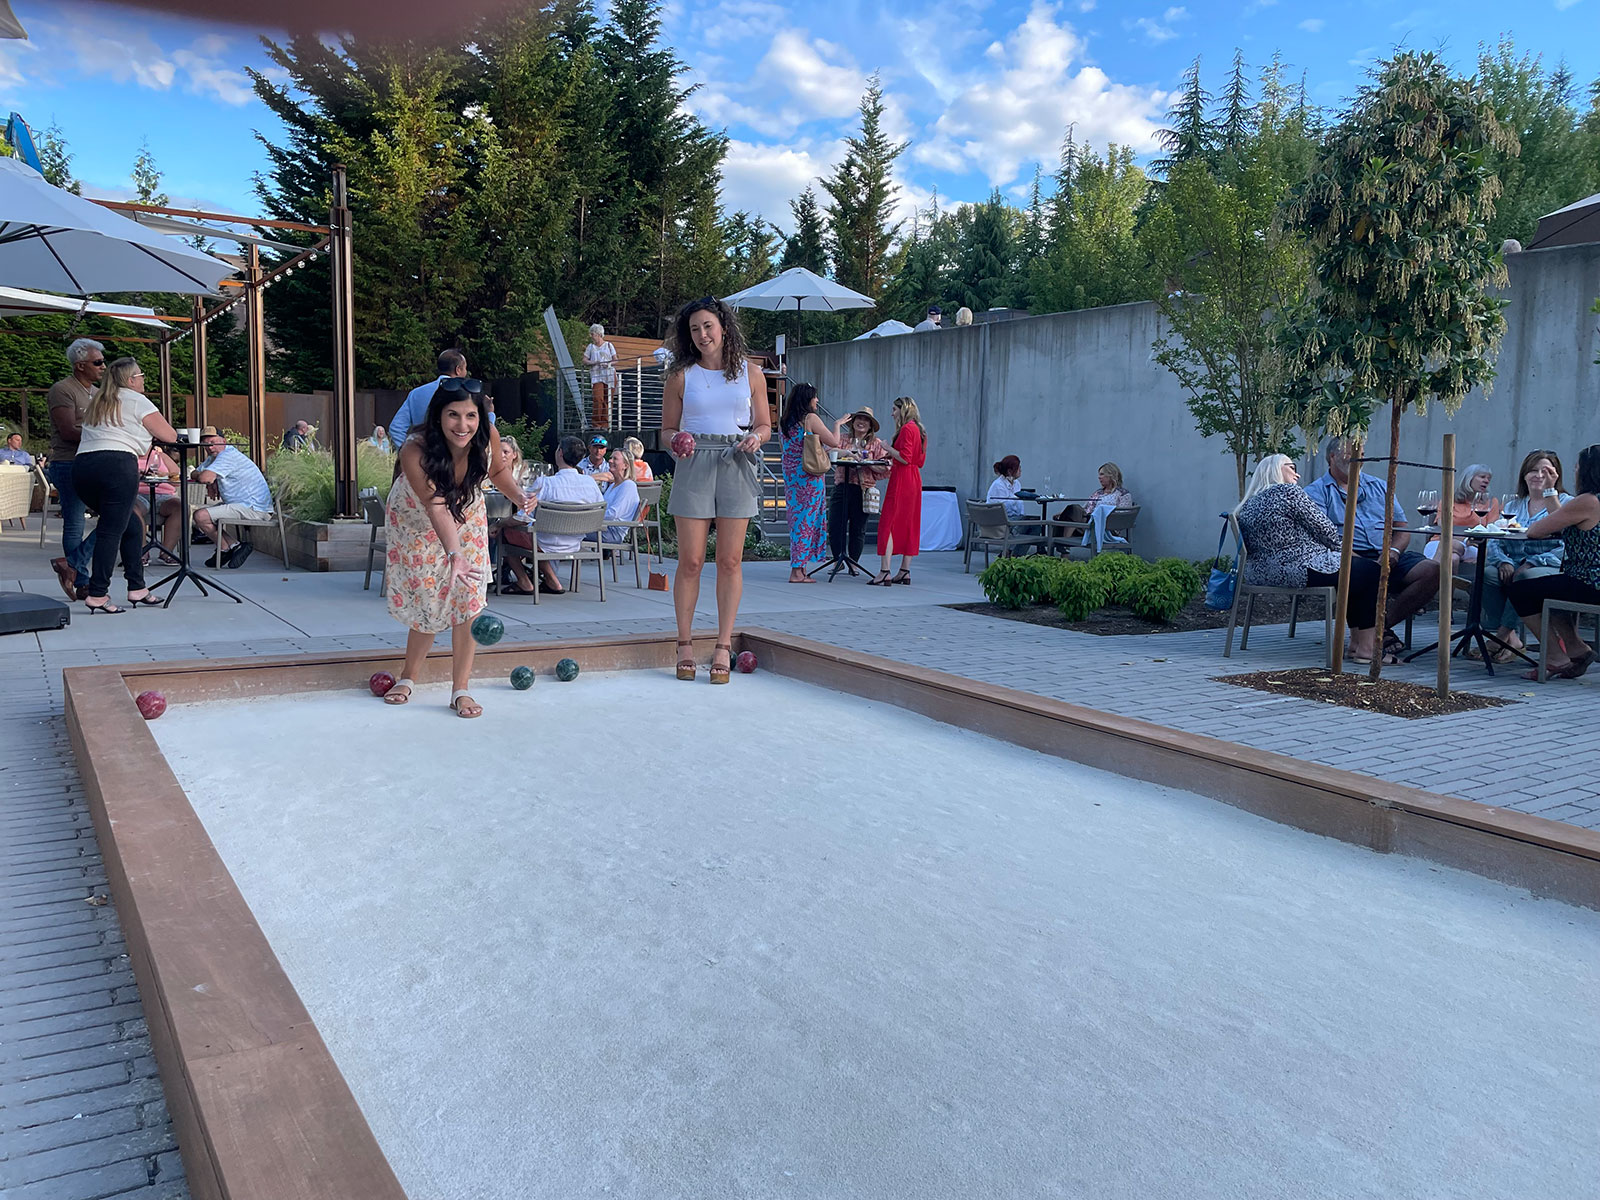 Bocce ball and wine tasting on outdoor patio at Novelty Hill Januik wine club event in Woodinville